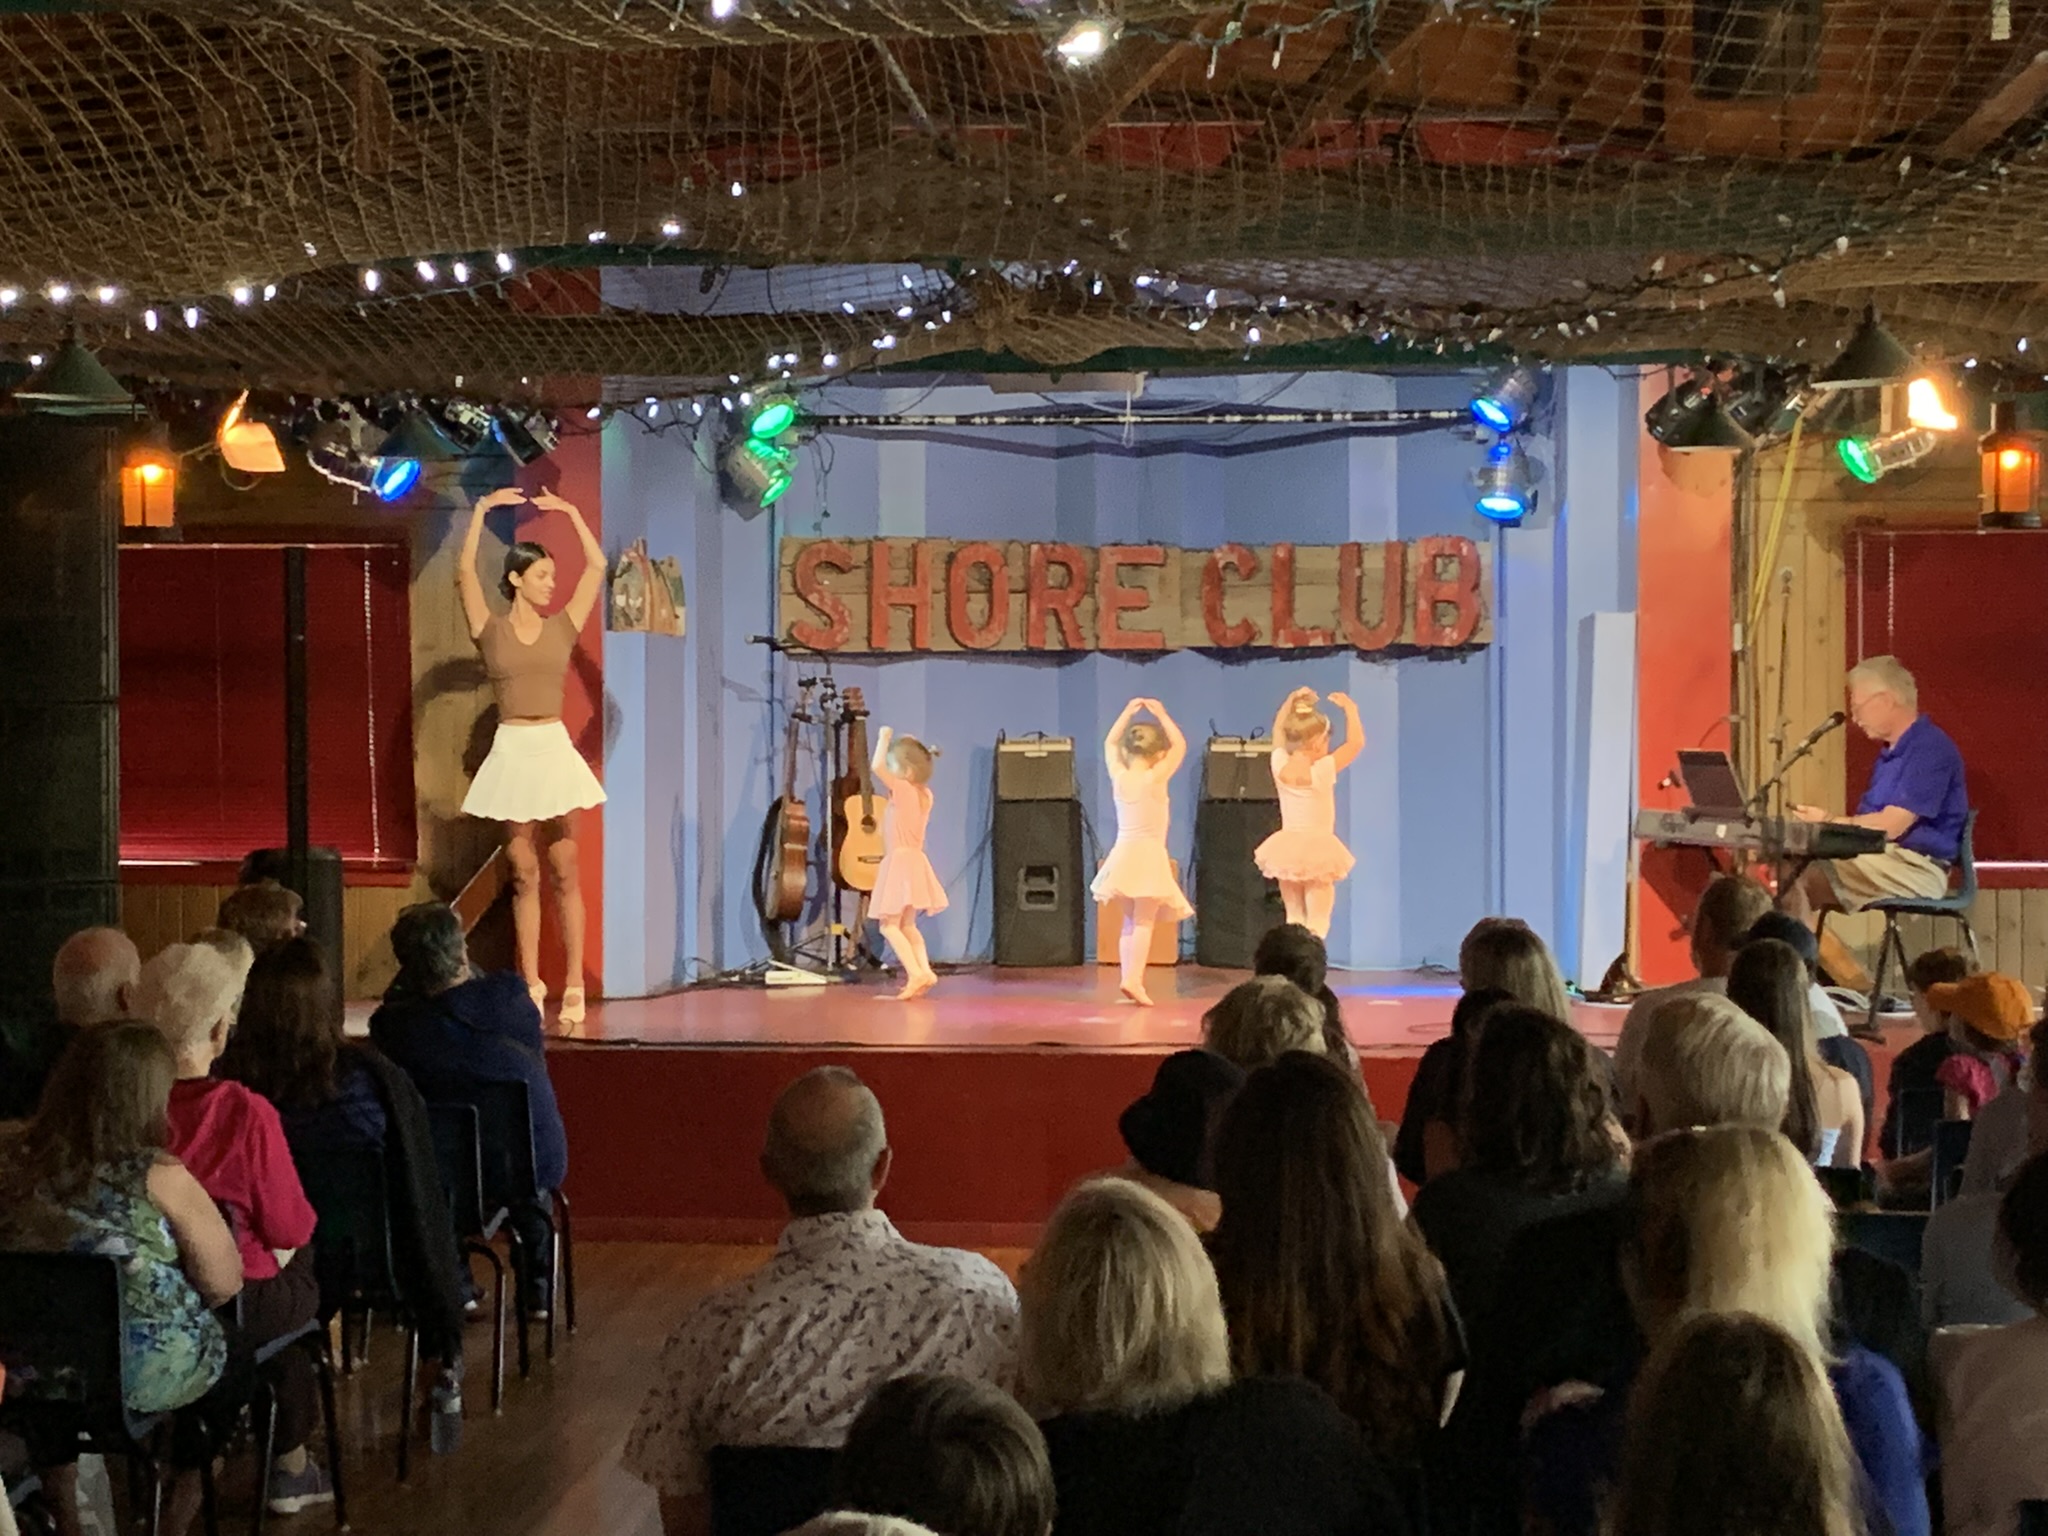 On Tuesday August 2nd, 2022, St. Luke's 74th Variety Show was held at the Shore Club.